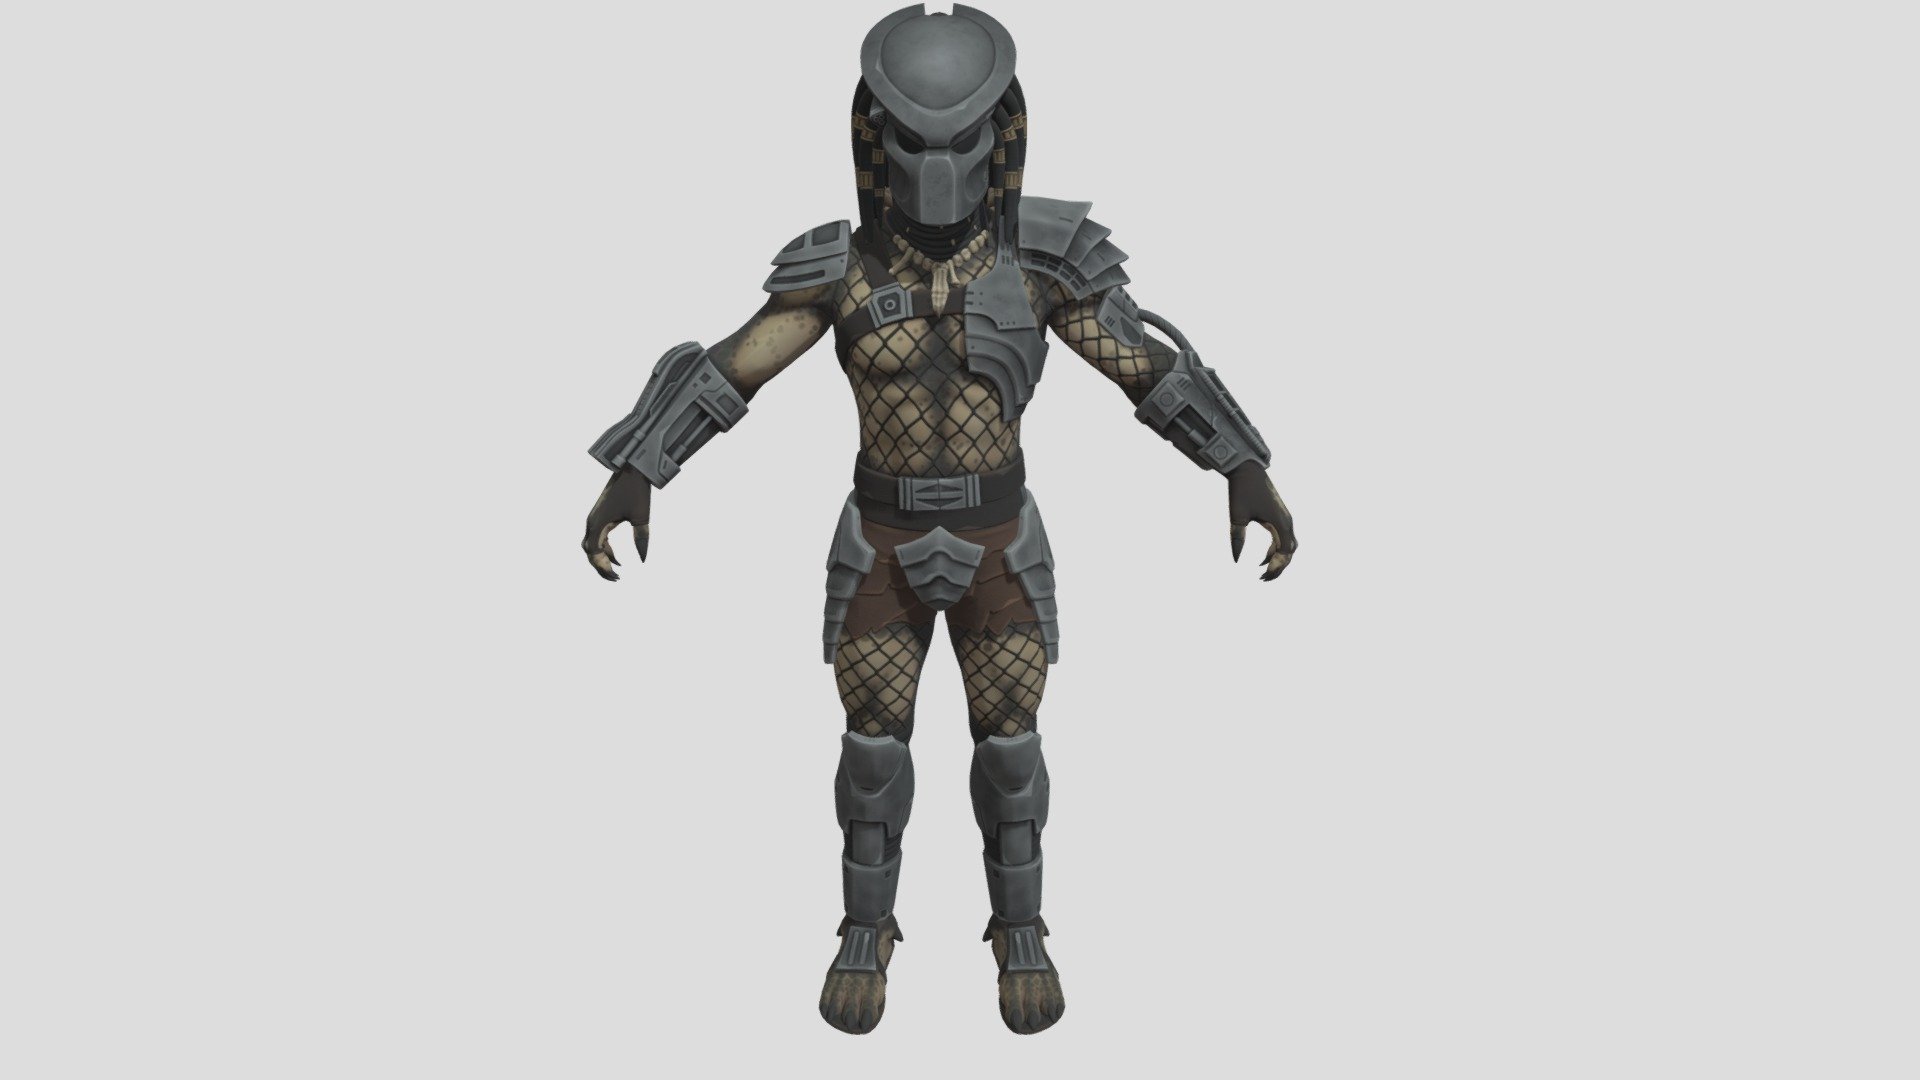 Predator - Fortnite Version Original 3D Model from game free download for Unity and Unreal Engine!

PS: Epic Games gived me this model :) - Predator - Fortnite Version - Download Free 3D model by EWTube0 3d model